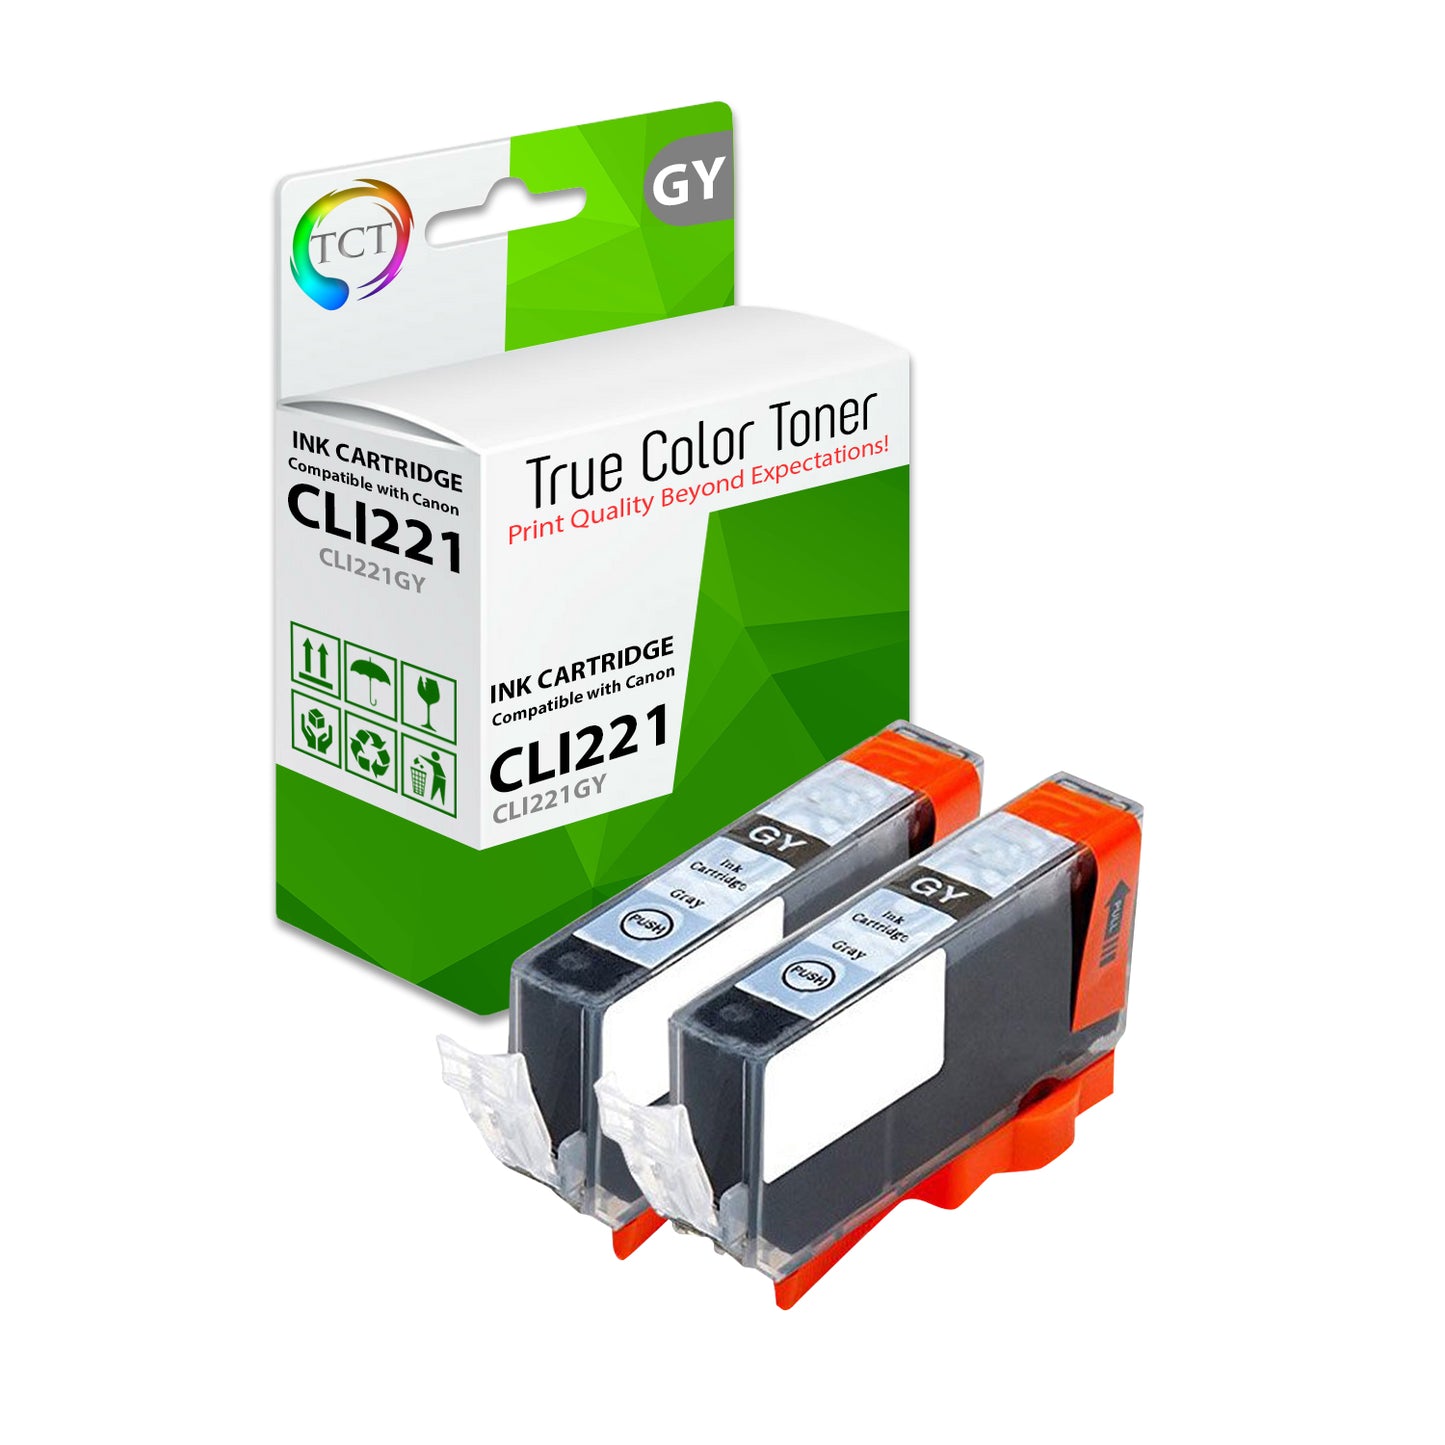 TCT Compatible Ink Cartridge Replacement for the Canon CLI-221 Series - 2 Pack Gray